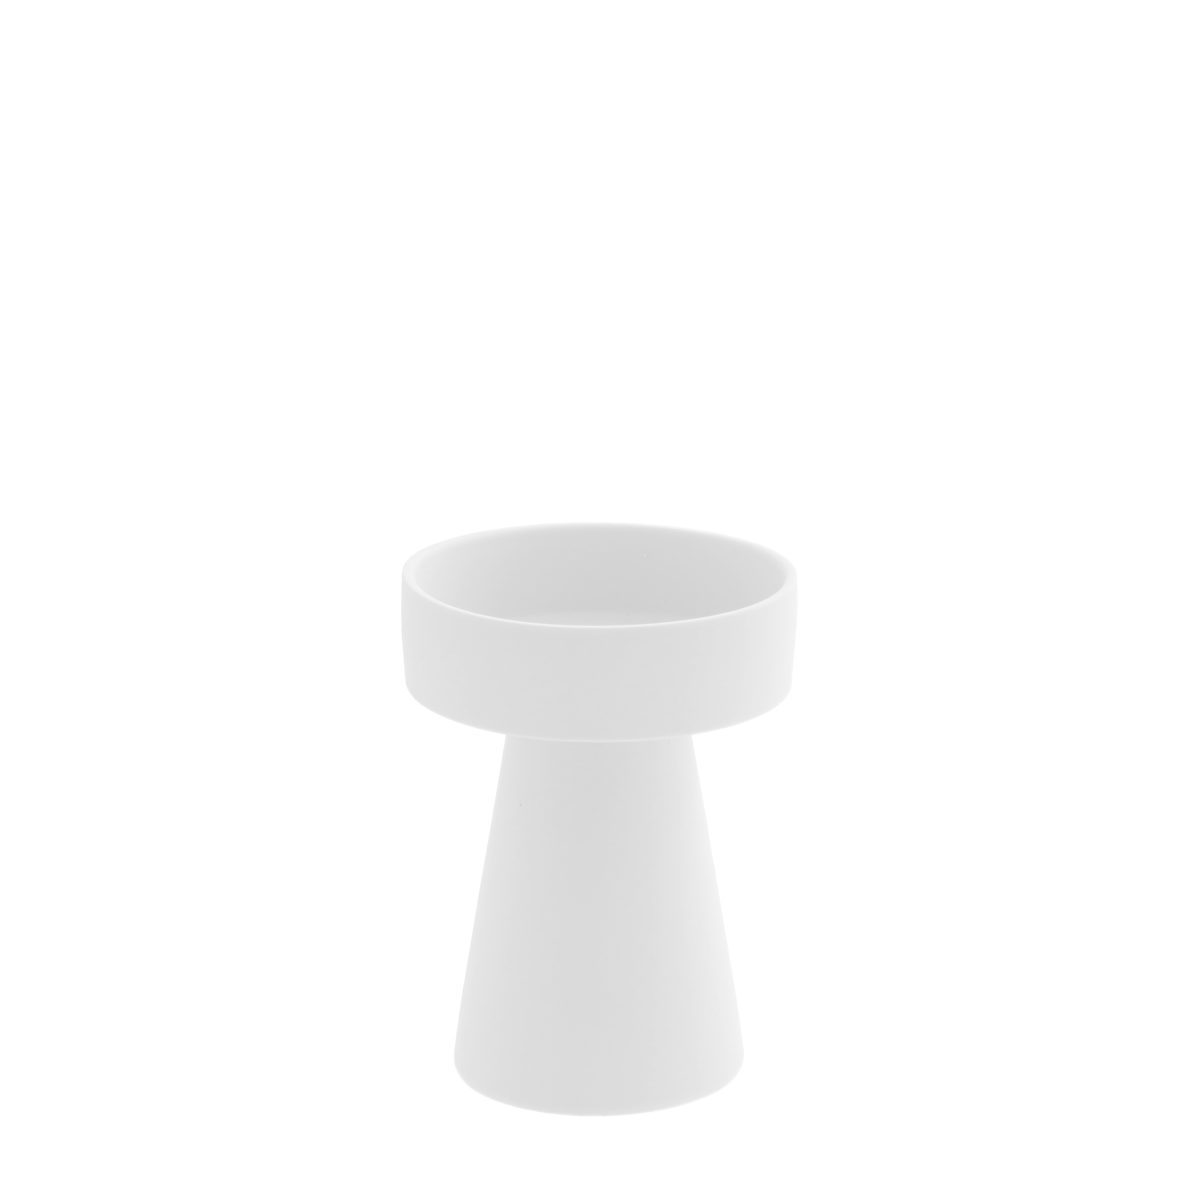 storefactory-small-white-candle-holder